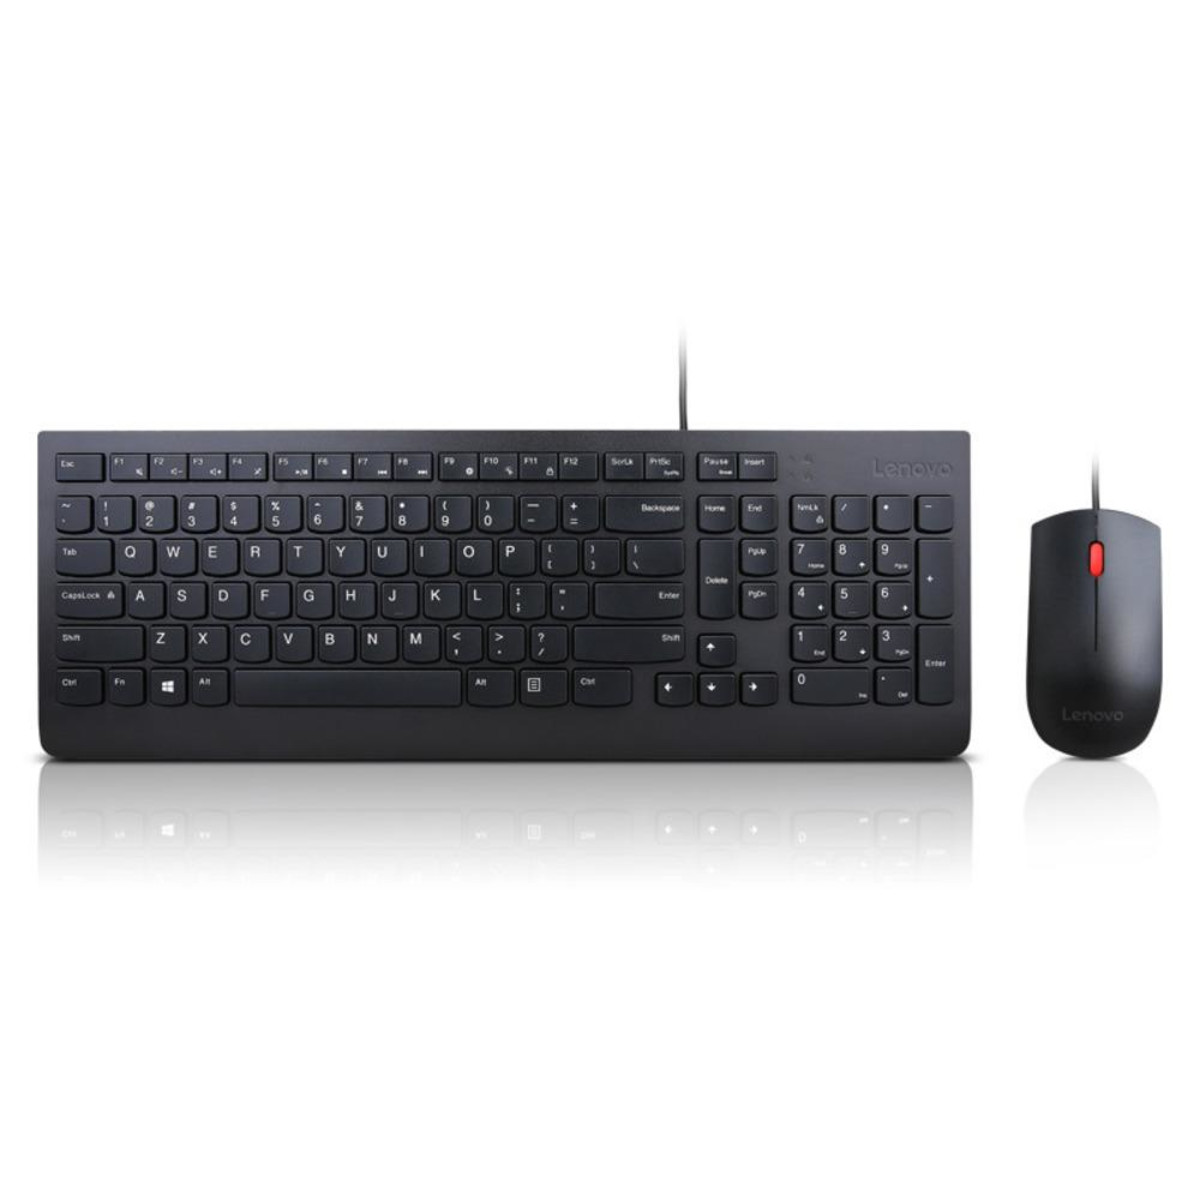 Wired Keyboard Mouse Combo - US English